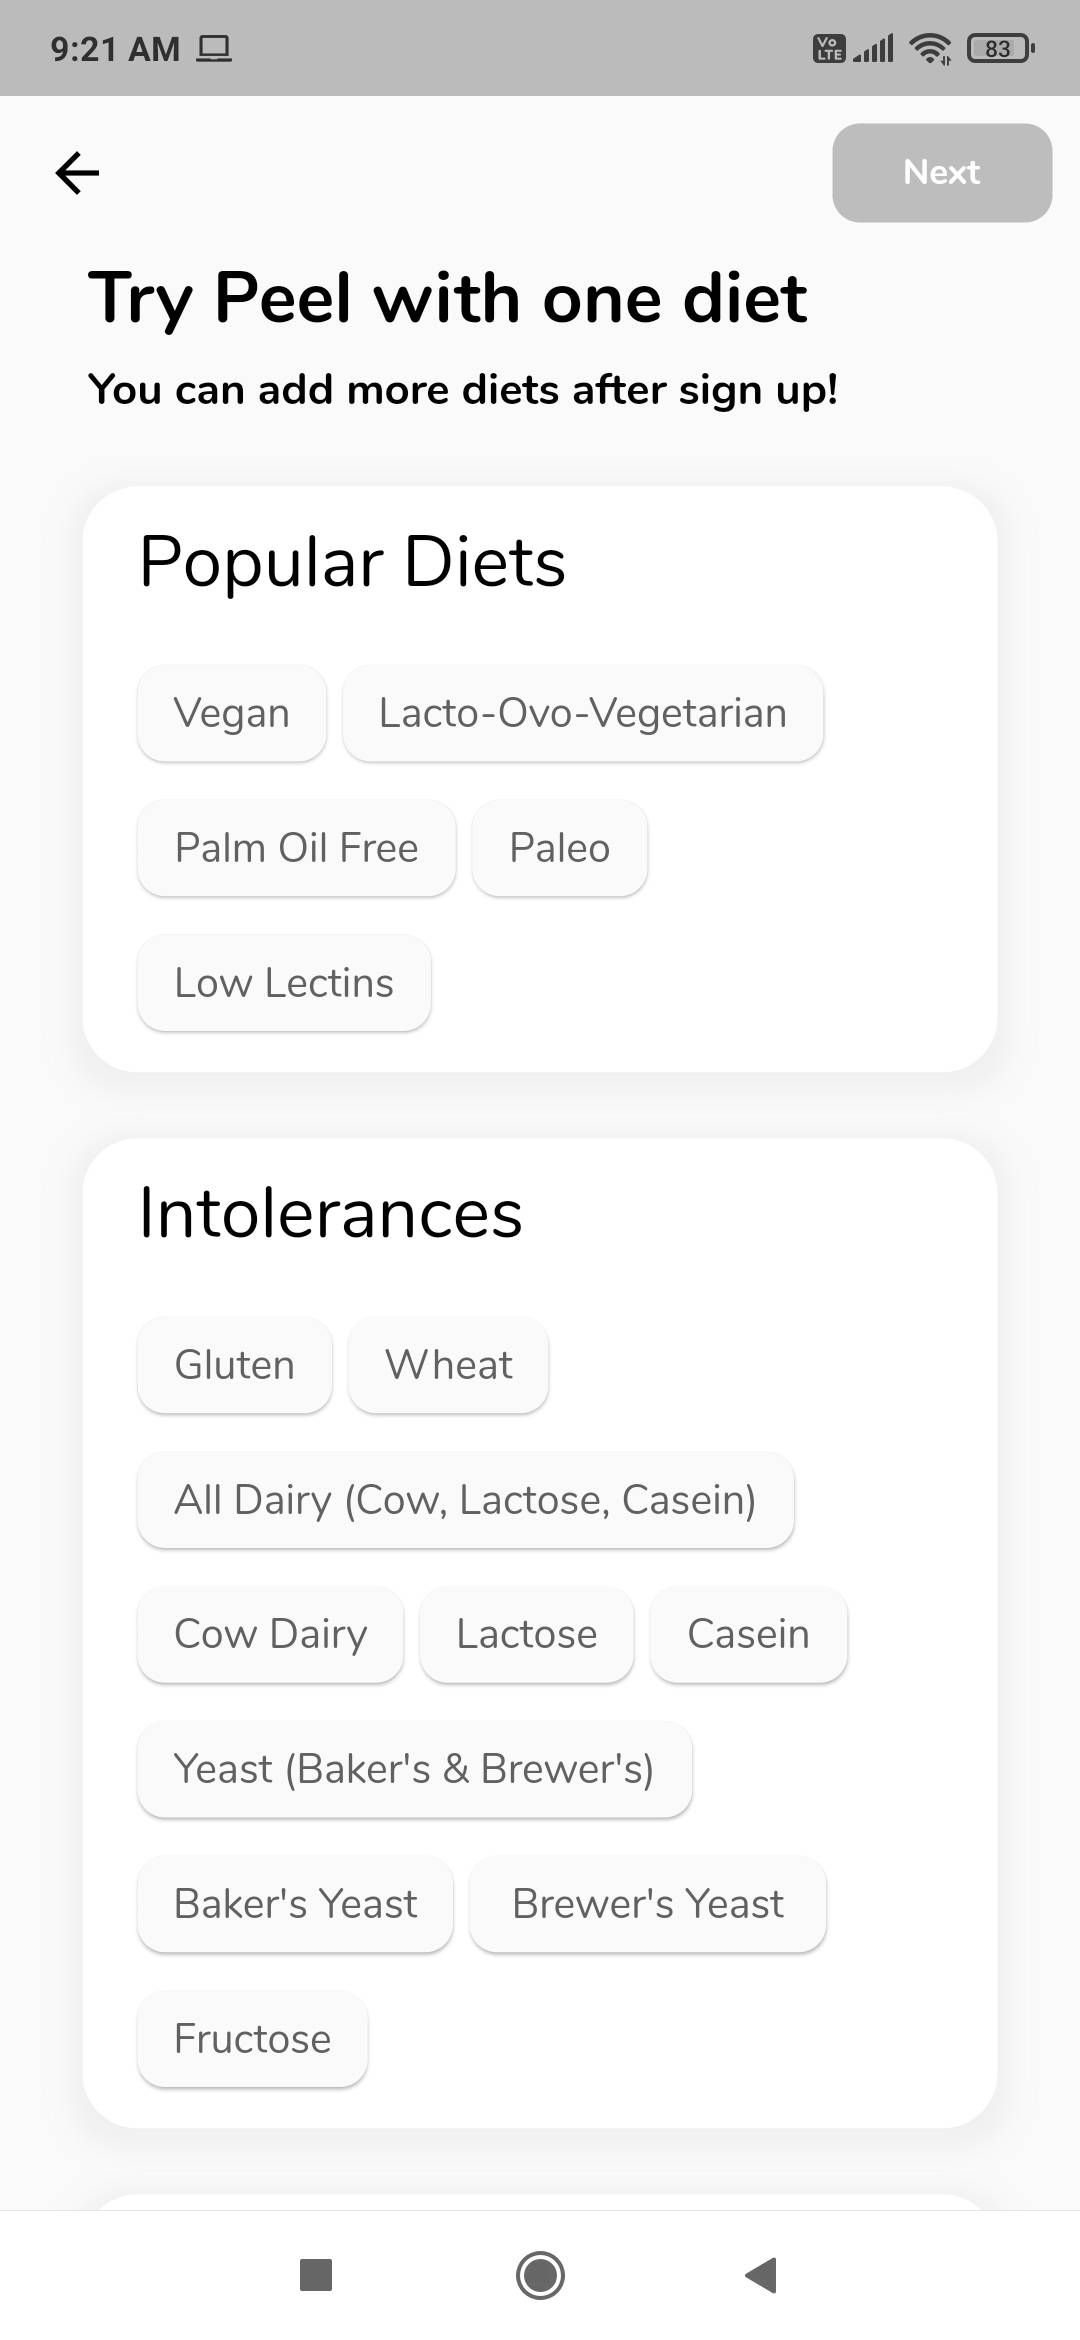 Choose from popular dietary preferences and intolerances on Peel